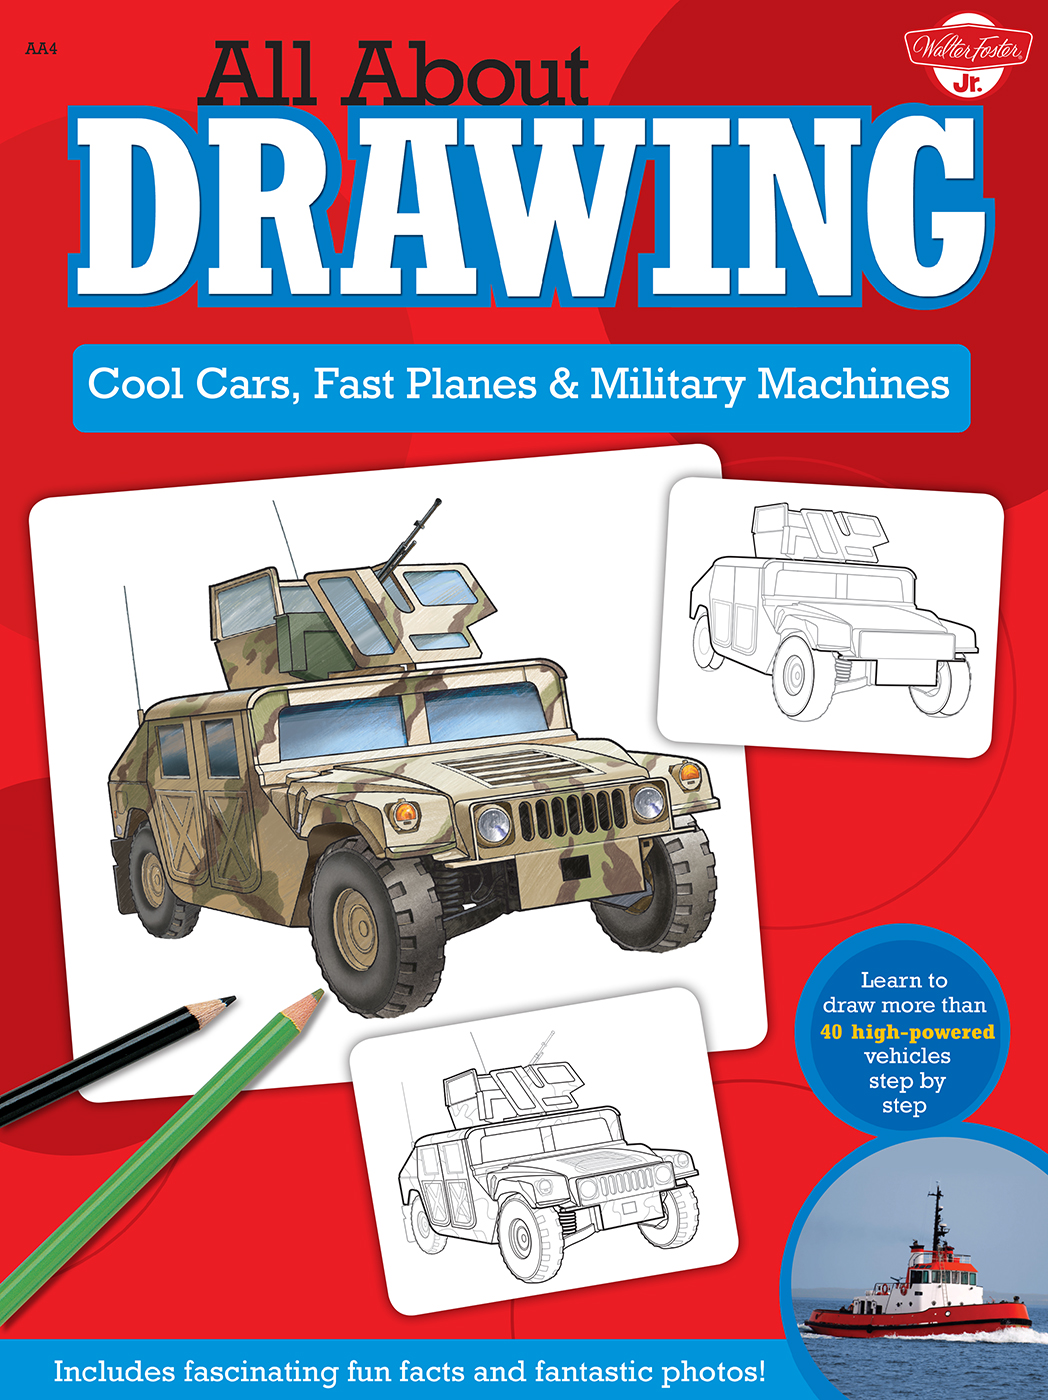 All About DRAWING Cool Cars Fast Planes Military Machines Illustrated - photo 1